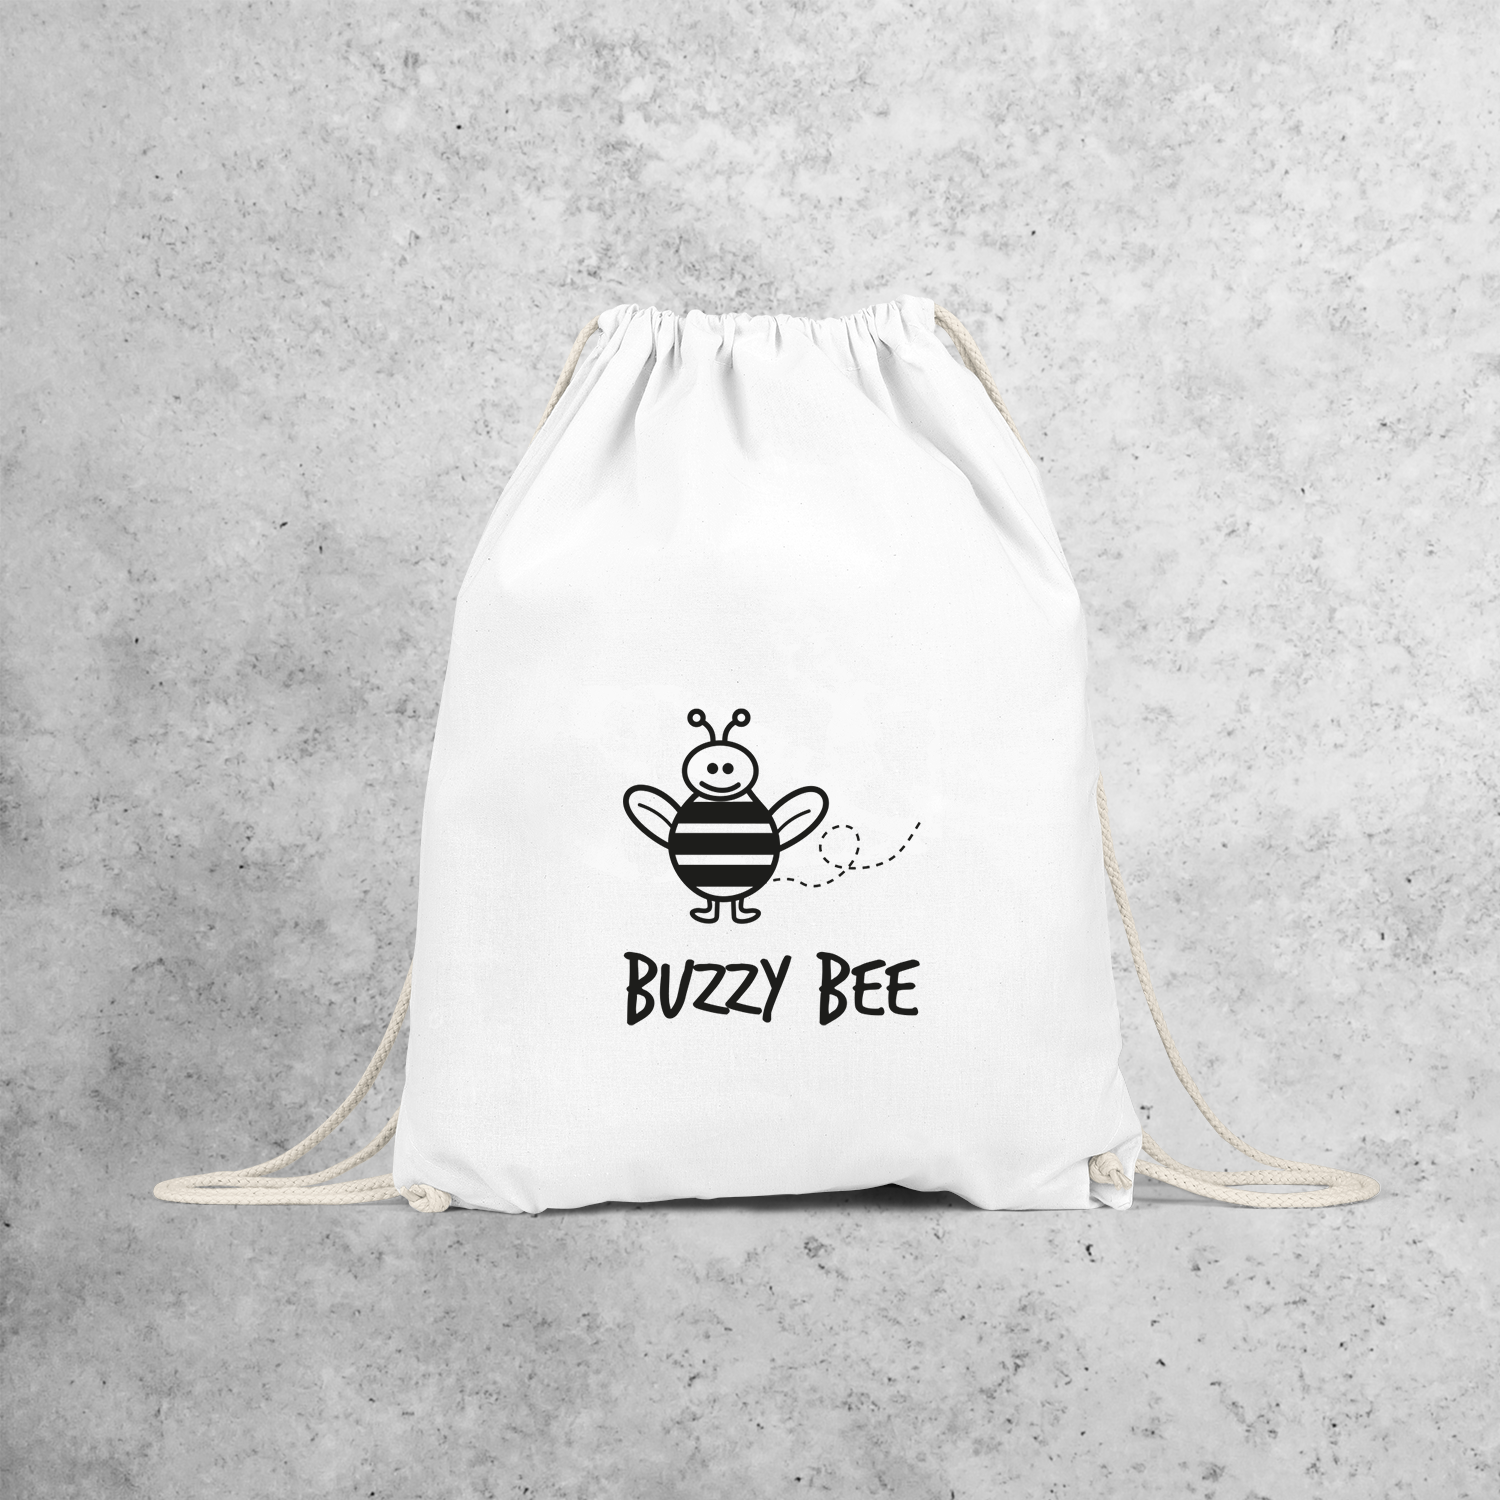 'Buzzy bee' backpack